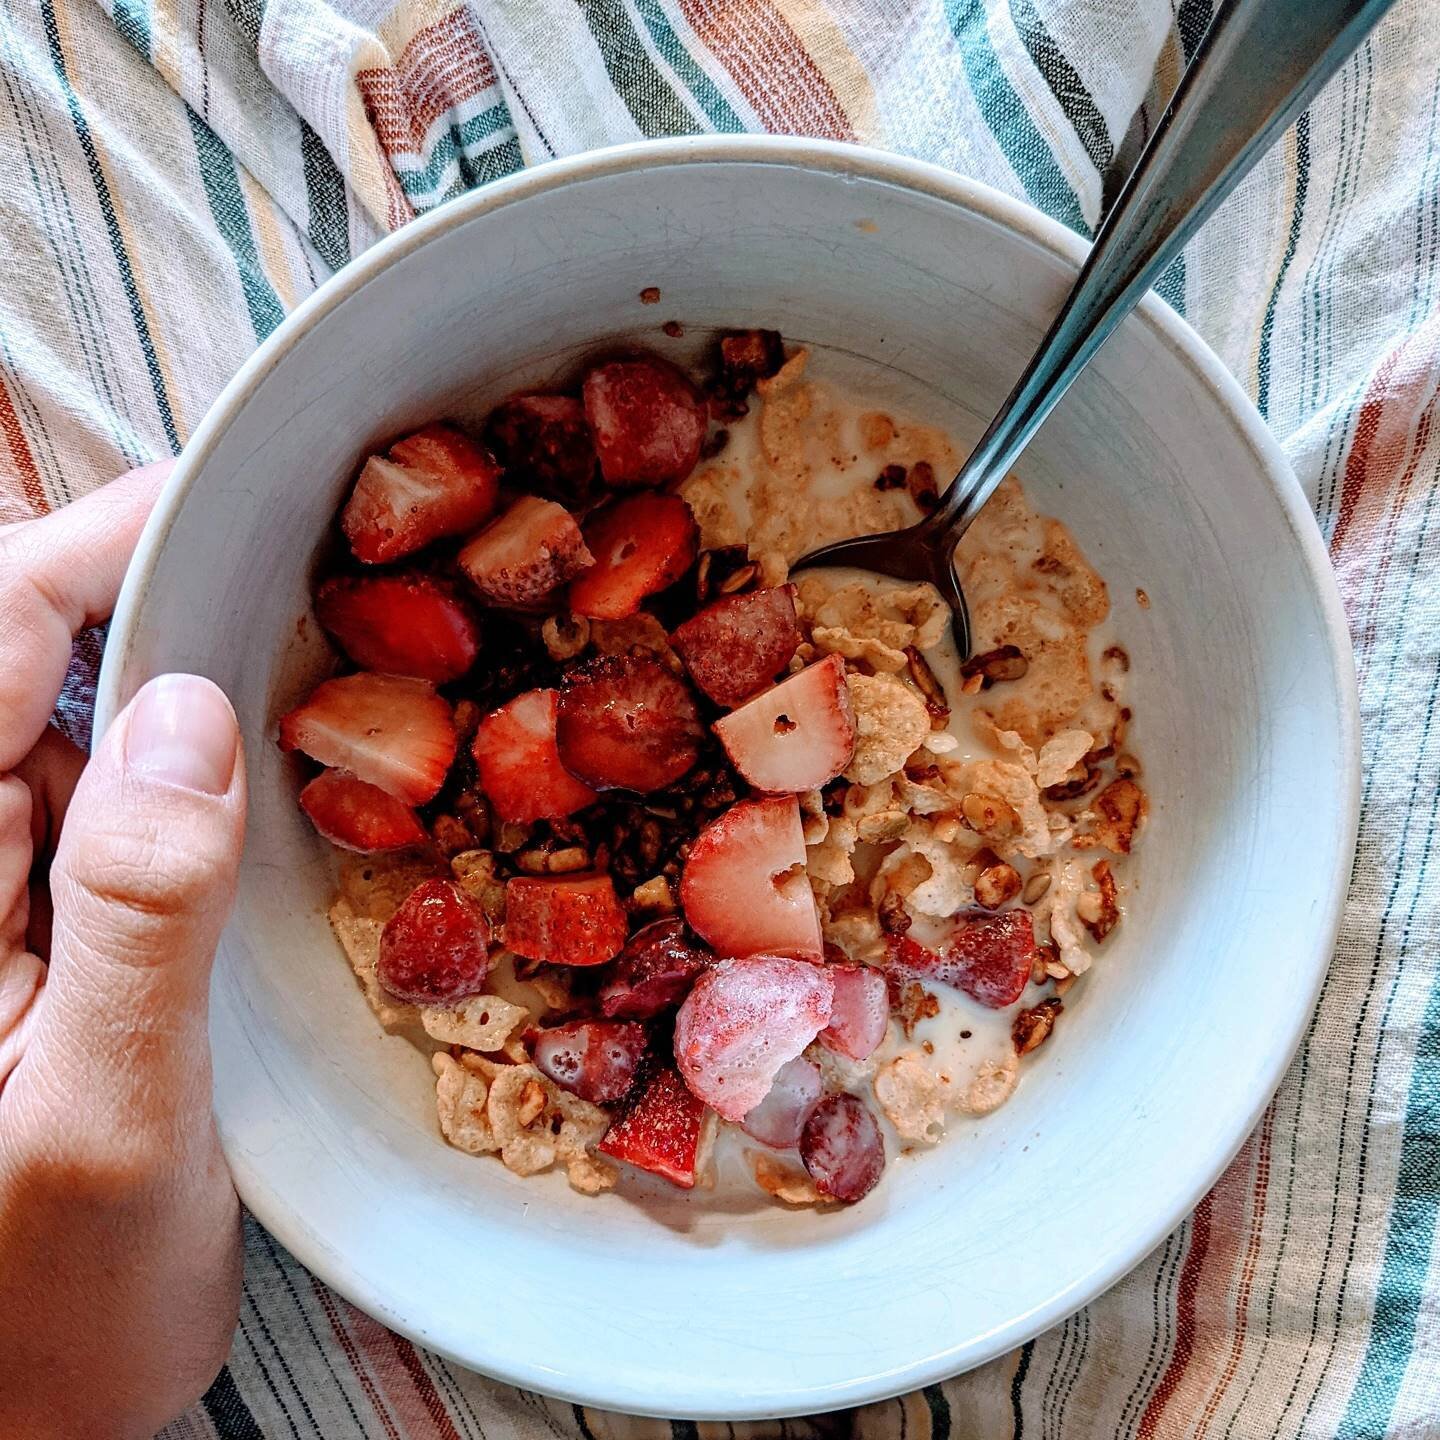 Boost your brekkie!

Athletes know that protein is an integral part of sports nutrition, but they often struggle to get enough at breakfast, especially if they reach for cold cereal or oats.

However, there are a few benefits specific to upping prote